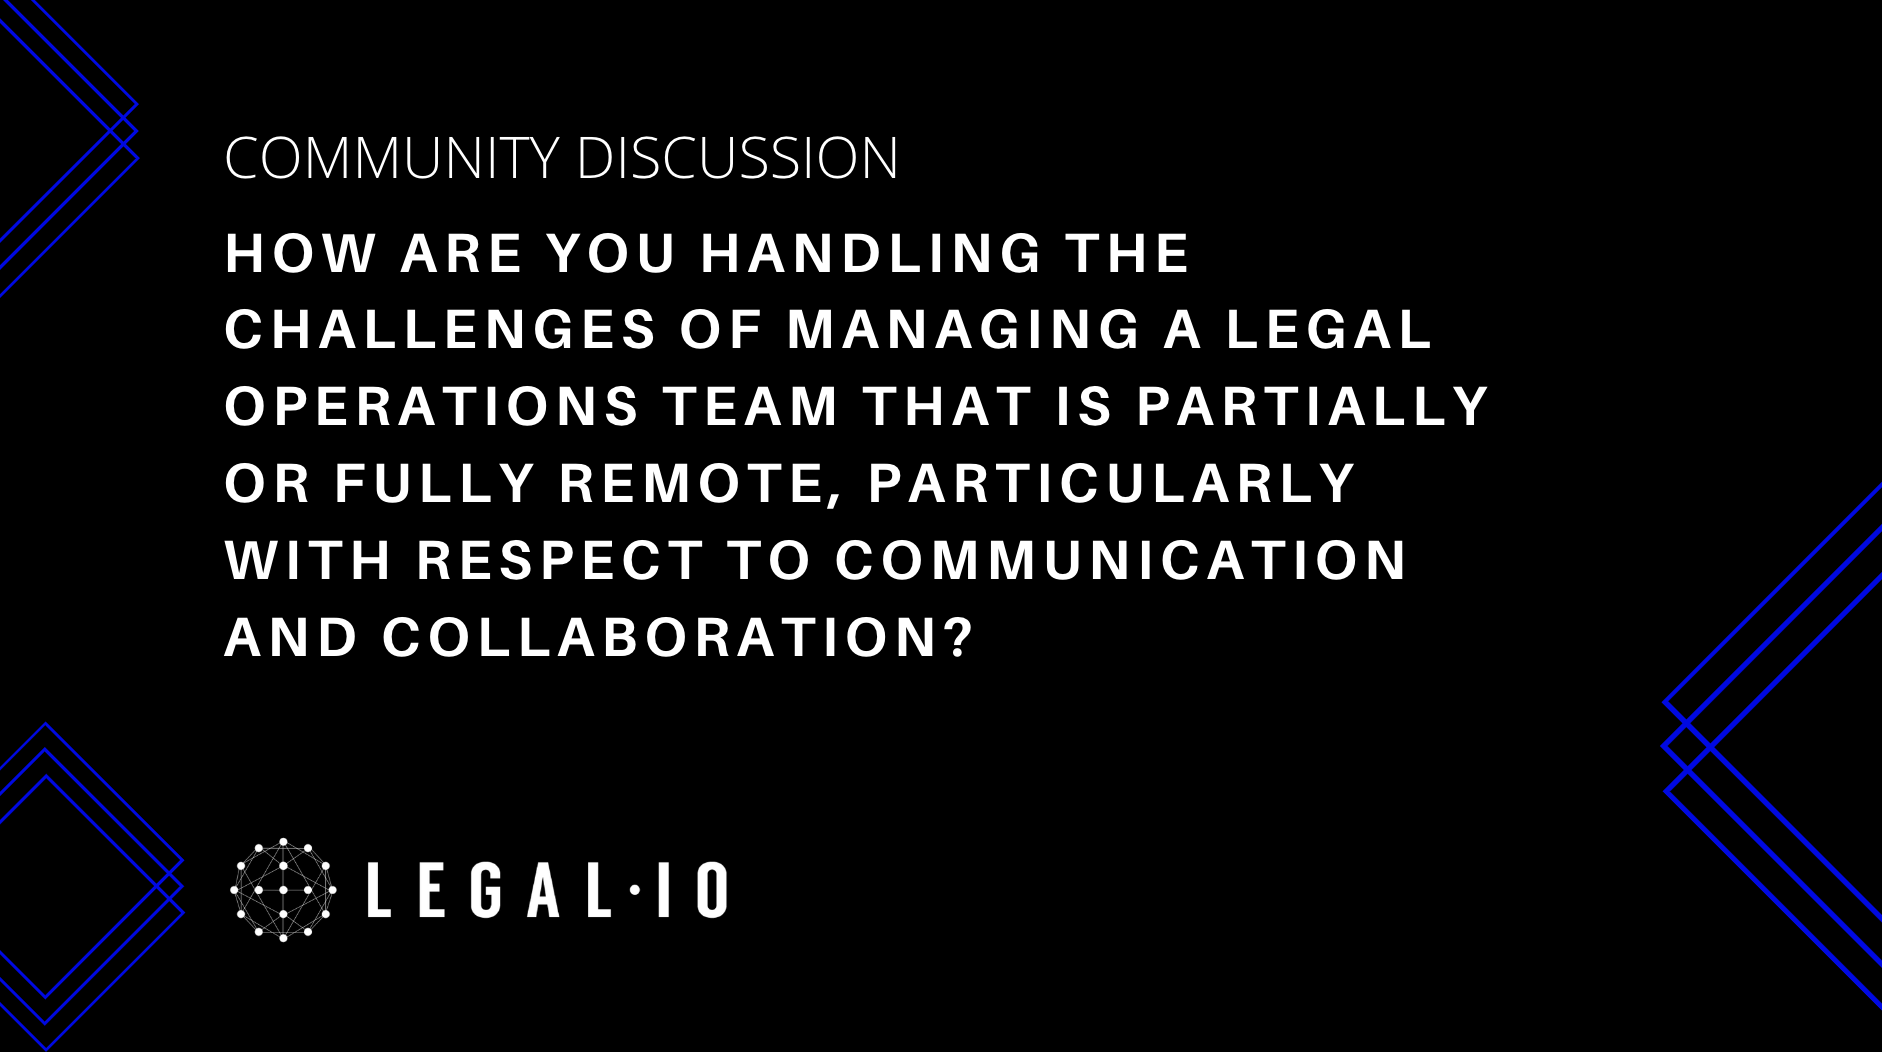 Community Discussion: How are you handling the challenges of managing a legal operations team that is partially or fully remote, particularly with respect to communication and collaboration?